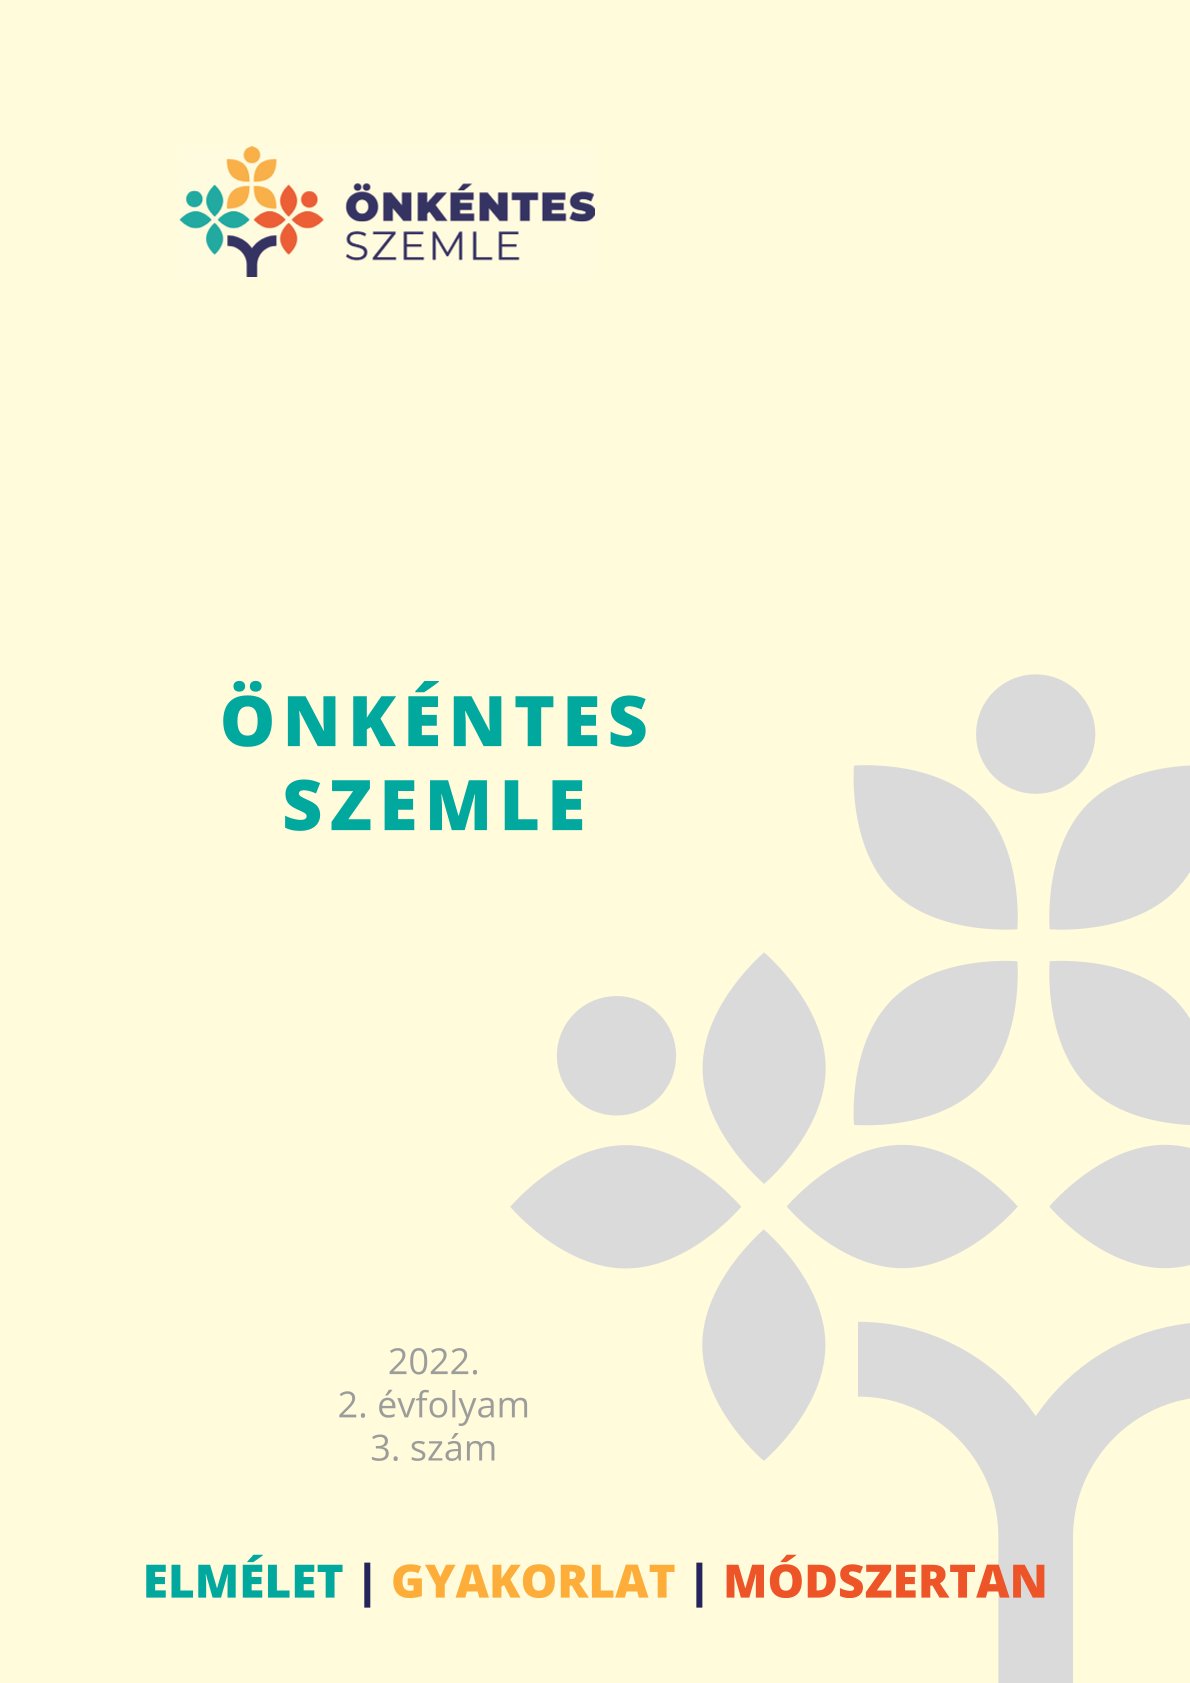 An overview of the practice and methodology related position and problems of the for- and nonprofit organization development in Hungary Cover Image